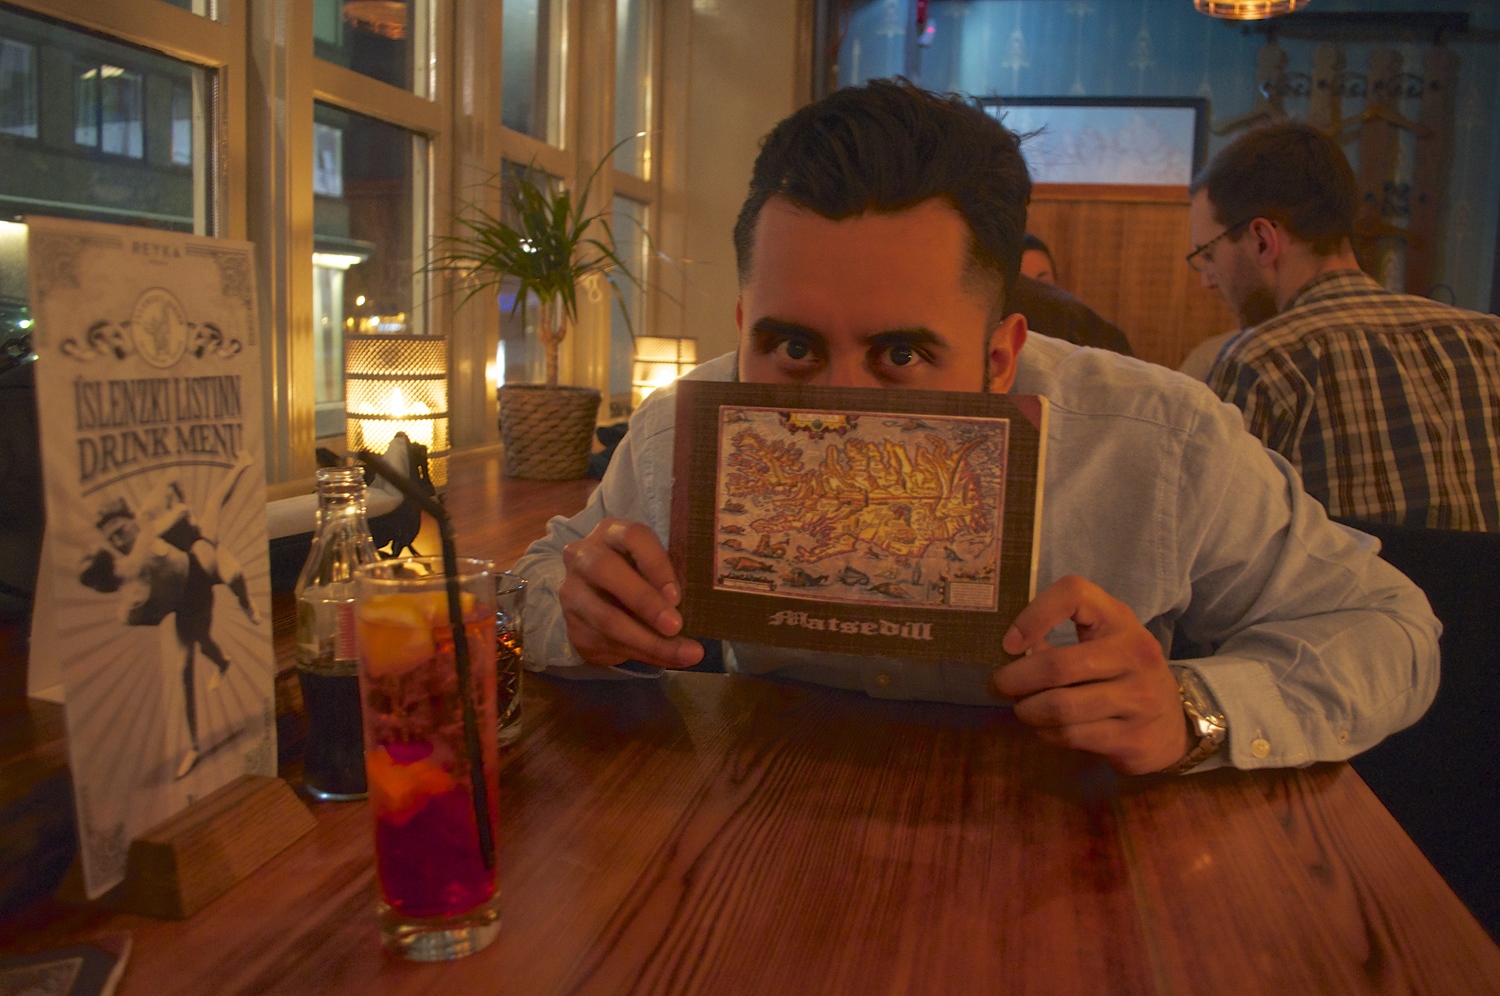 Luis at Icelandic Bar with the epic looking menu showing old map of Iceland.